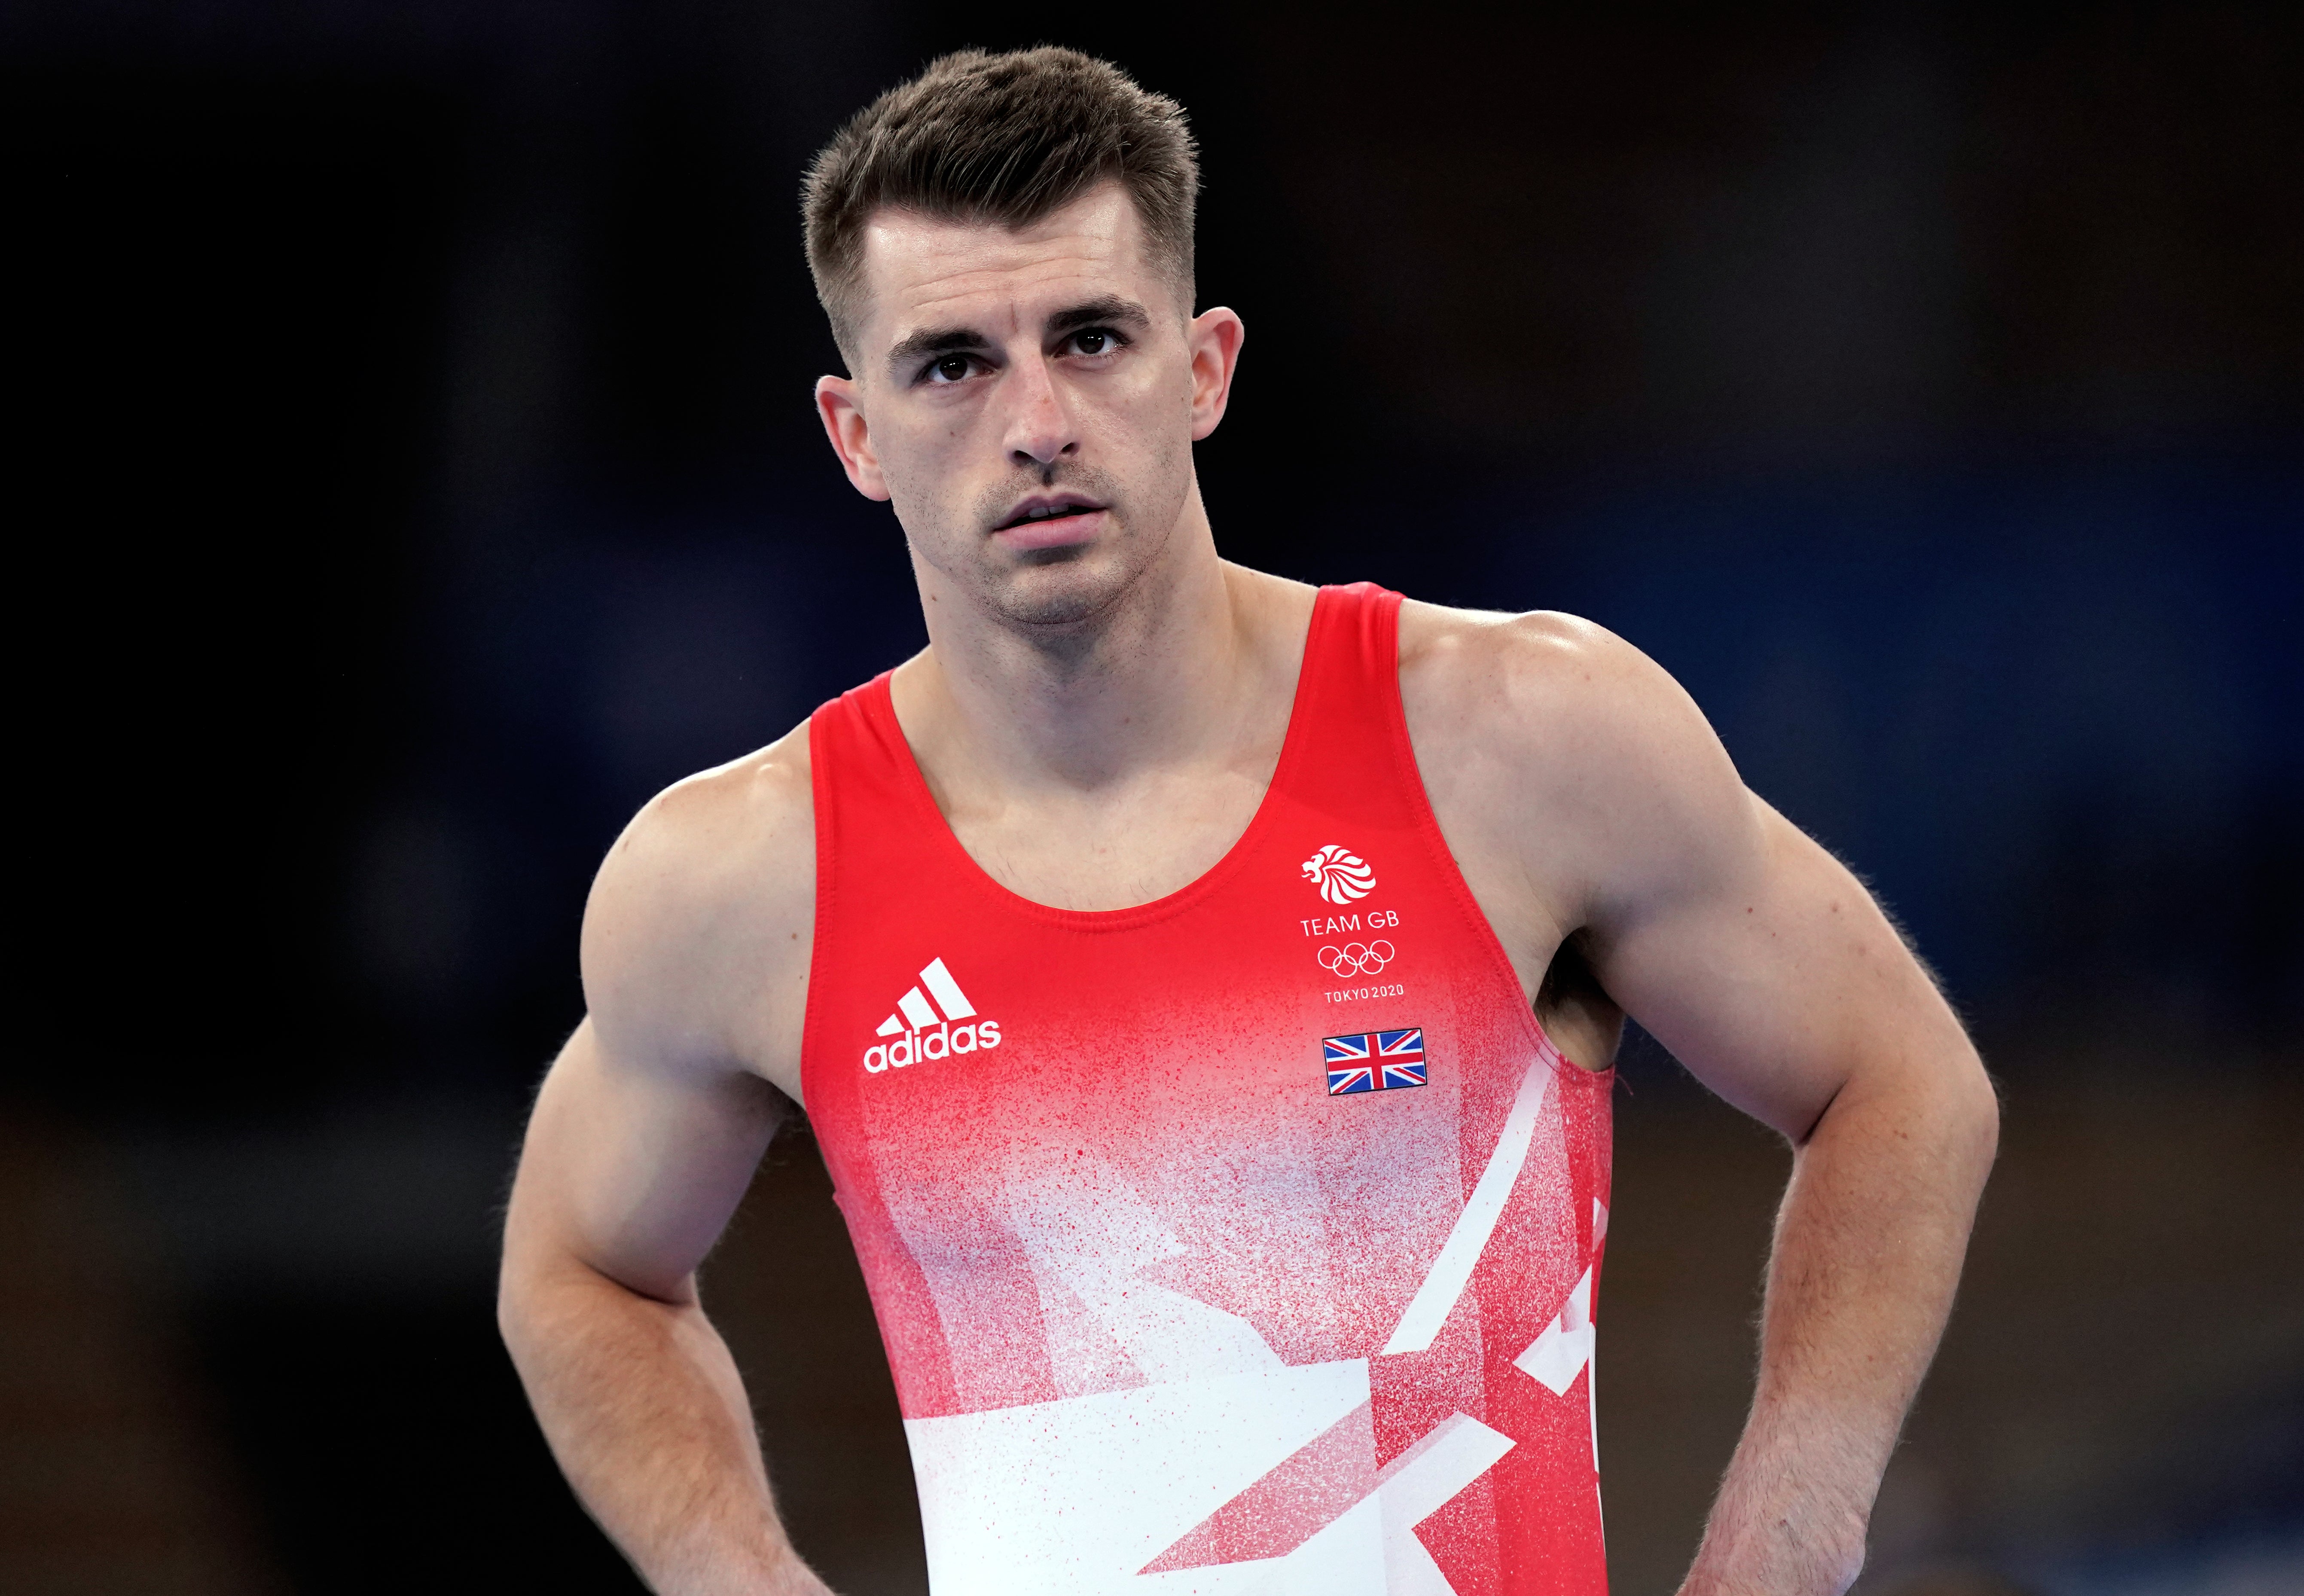 Max Whitlock safely negotiated pommel qualifying in Tokyo